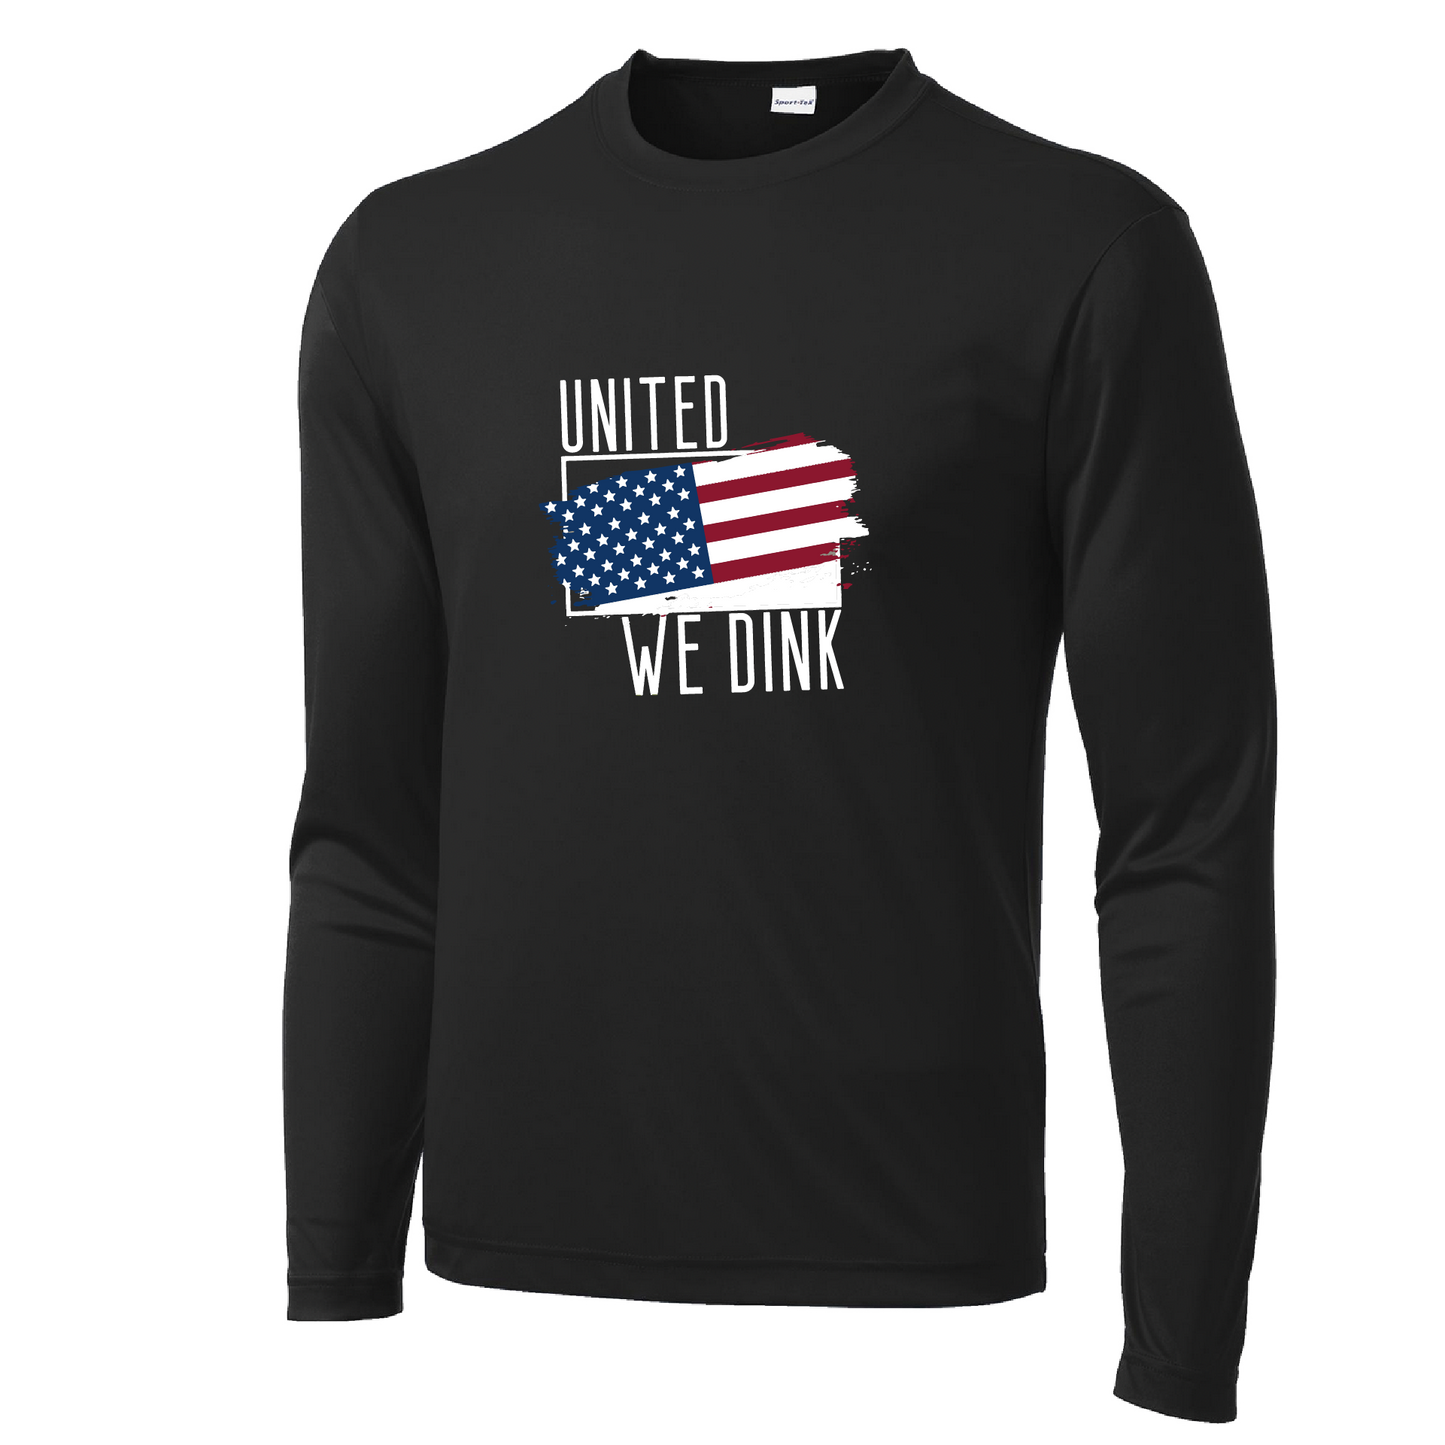 Pickleball Design: United We Dink  Men's Styles: Long-Sleeve  Shirts are lightweight, roomy and highly breathable. These moisture-wicking shirts are designed for athletic performance. They feature PosiCharge technology to lock in color and prevent logos from fading. Removable tag and set-in sleeves for comfort.